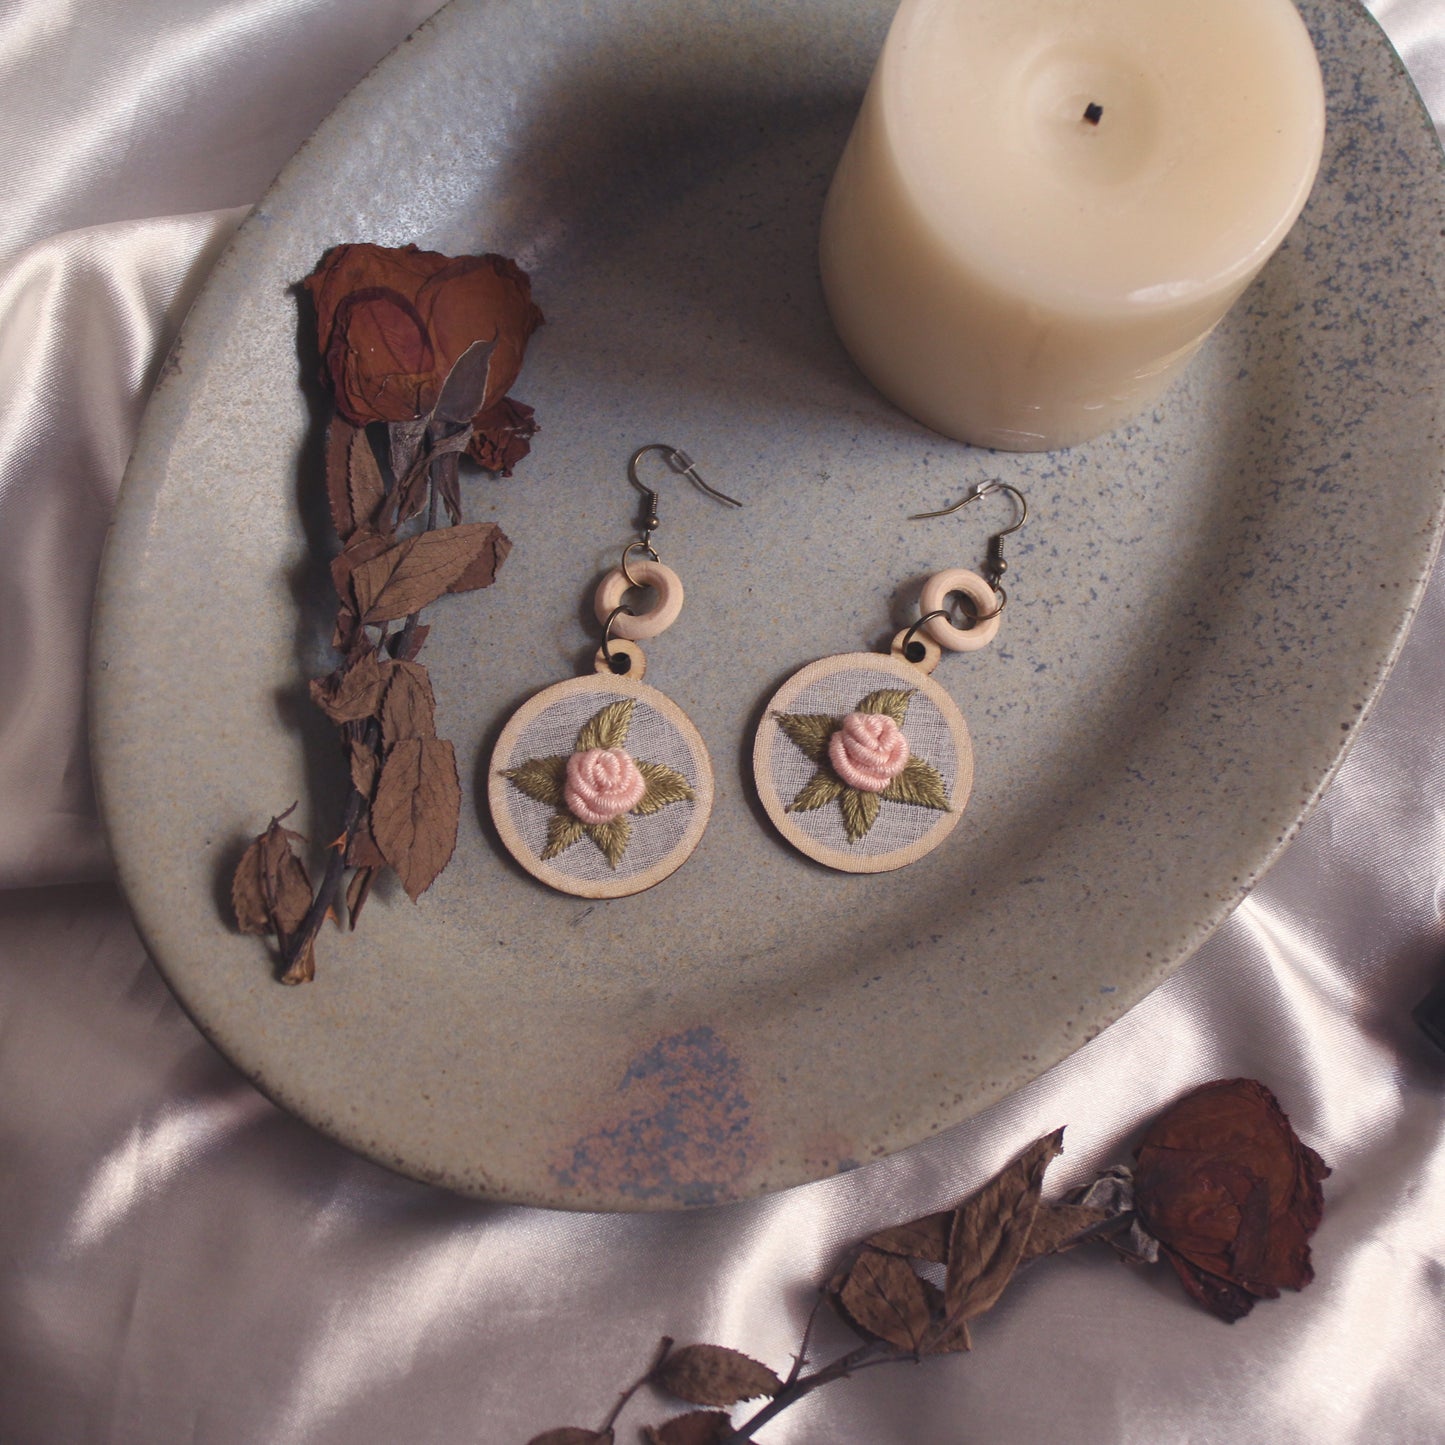 Soft Peach Rose Round Hollow Earrings